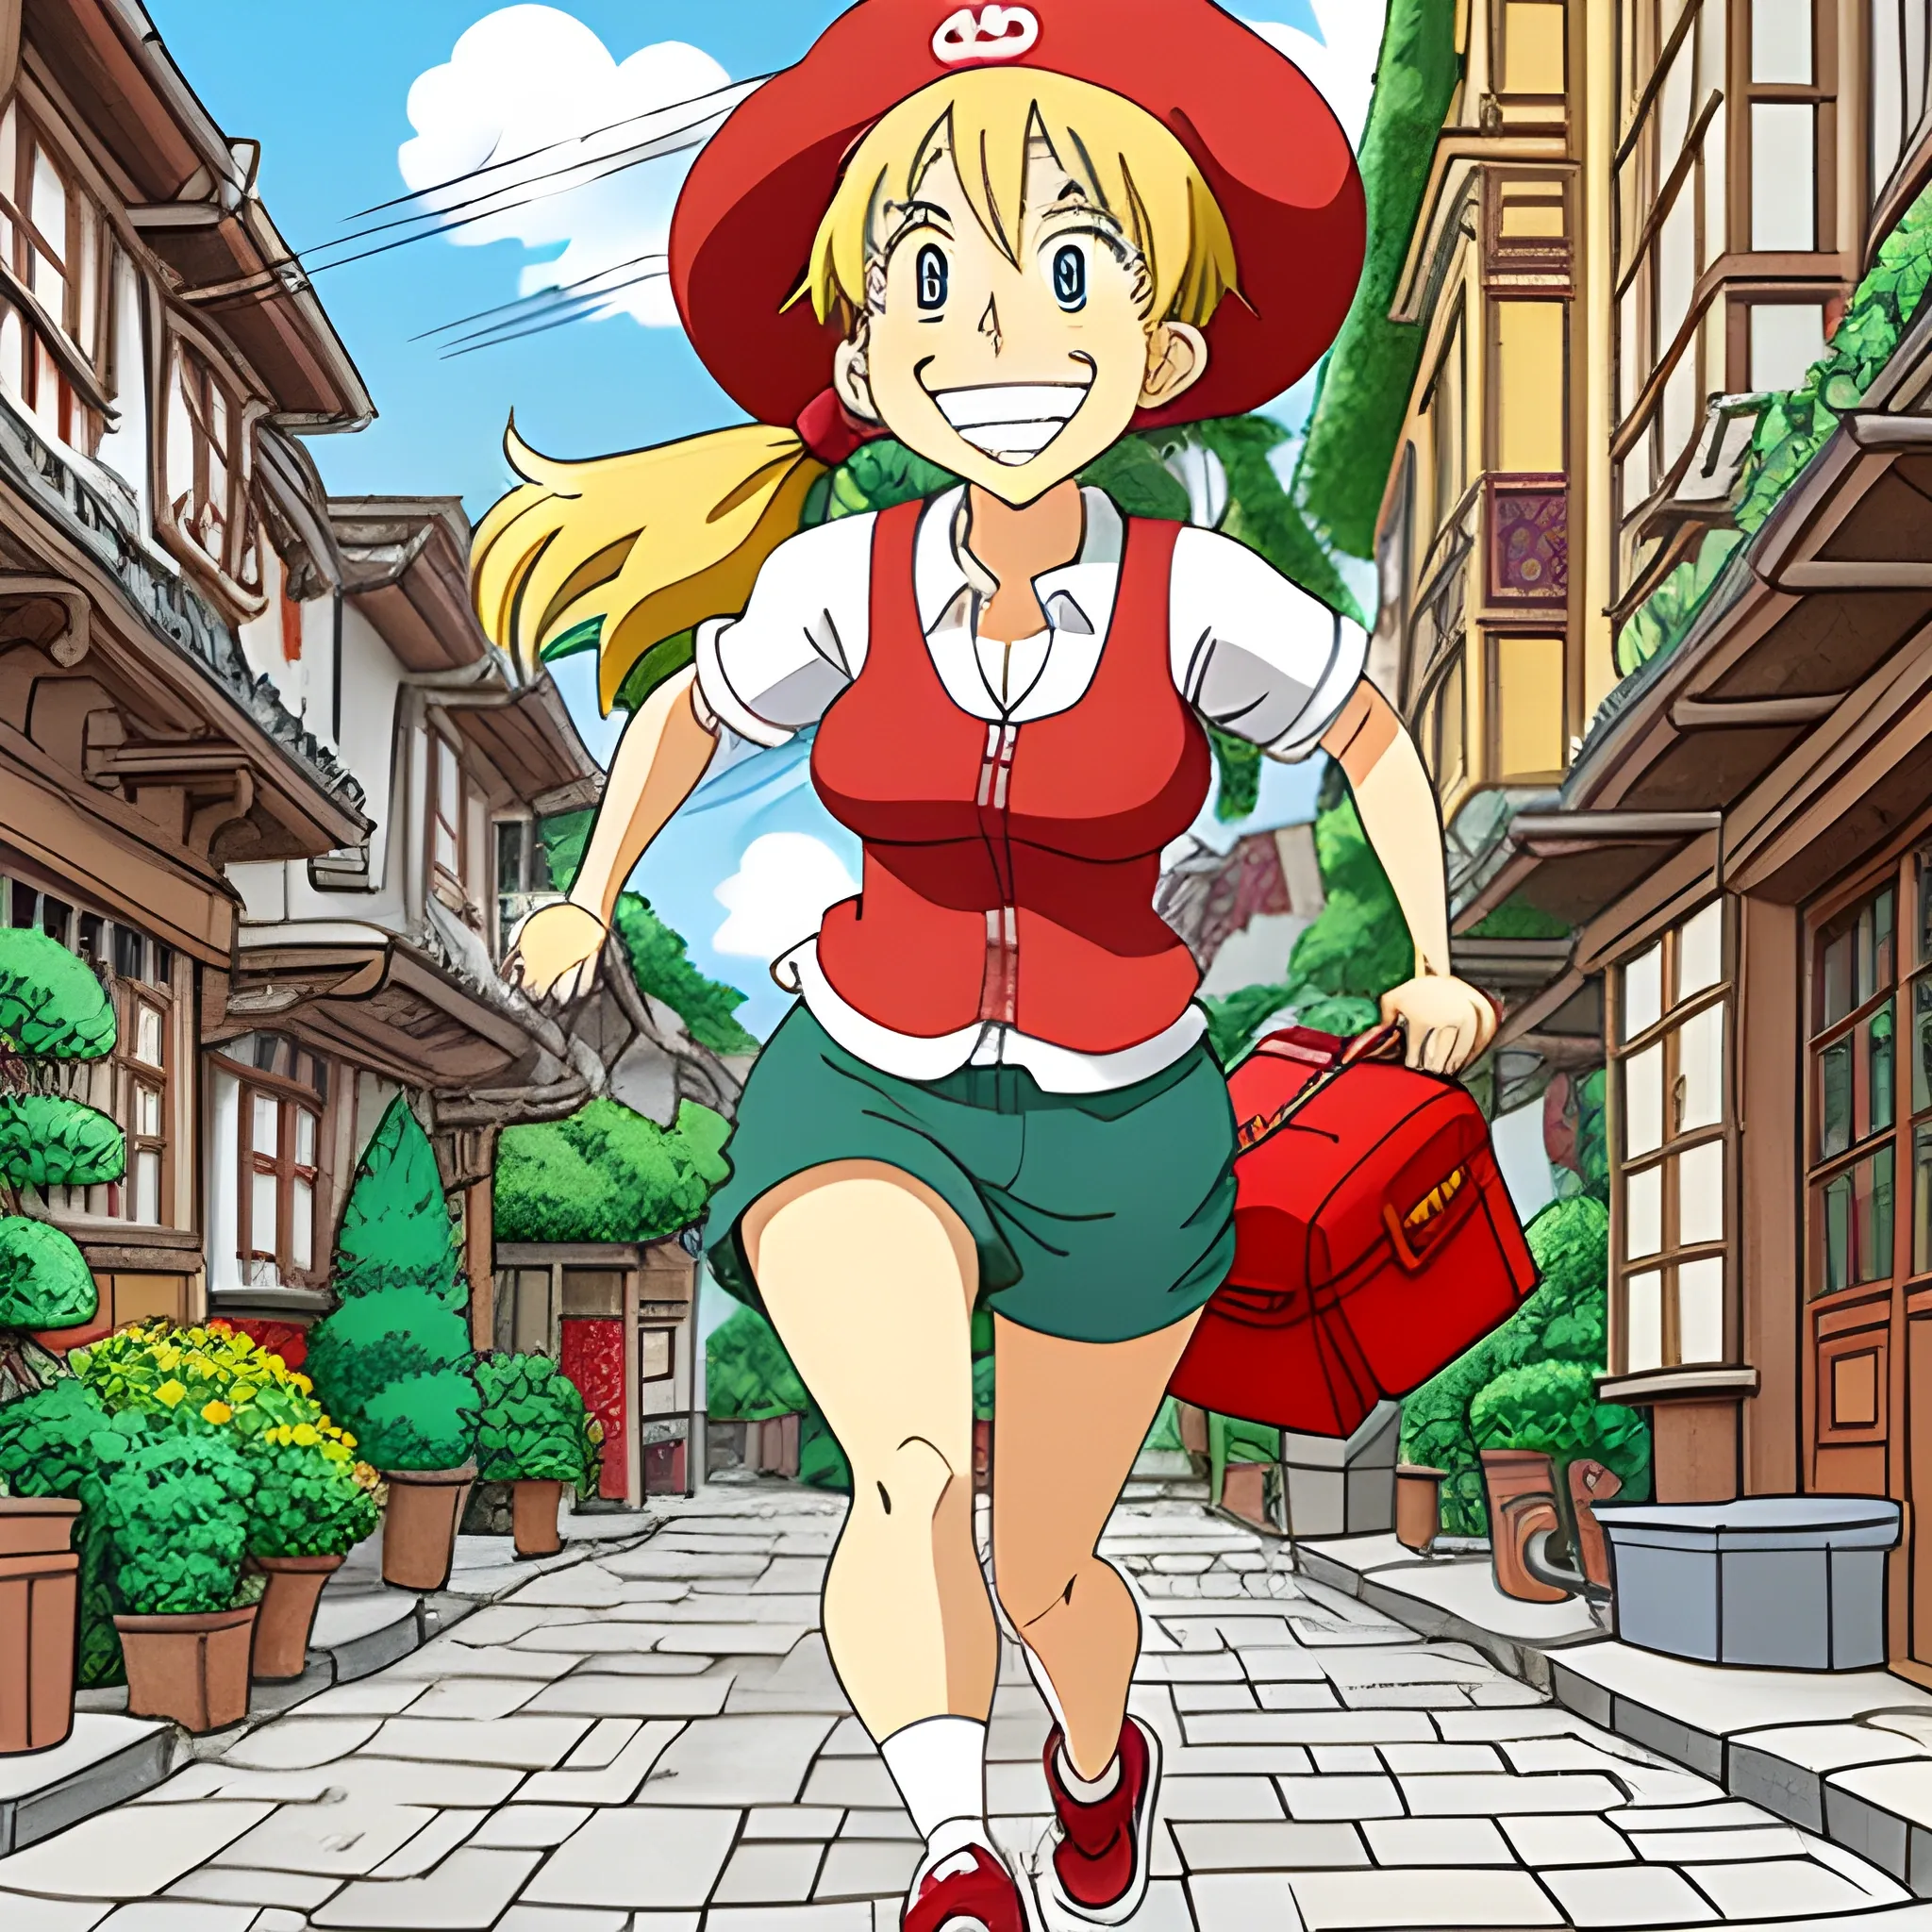 studio ghibli, where's waldo style,A very lively little girl named Keli has blonde hair and two ponytails. She runs around the village with a red schoolbag and a red hat every day, looking very happy and happy., Cartoon, Cartoon, Cartoon,five years old,little baby